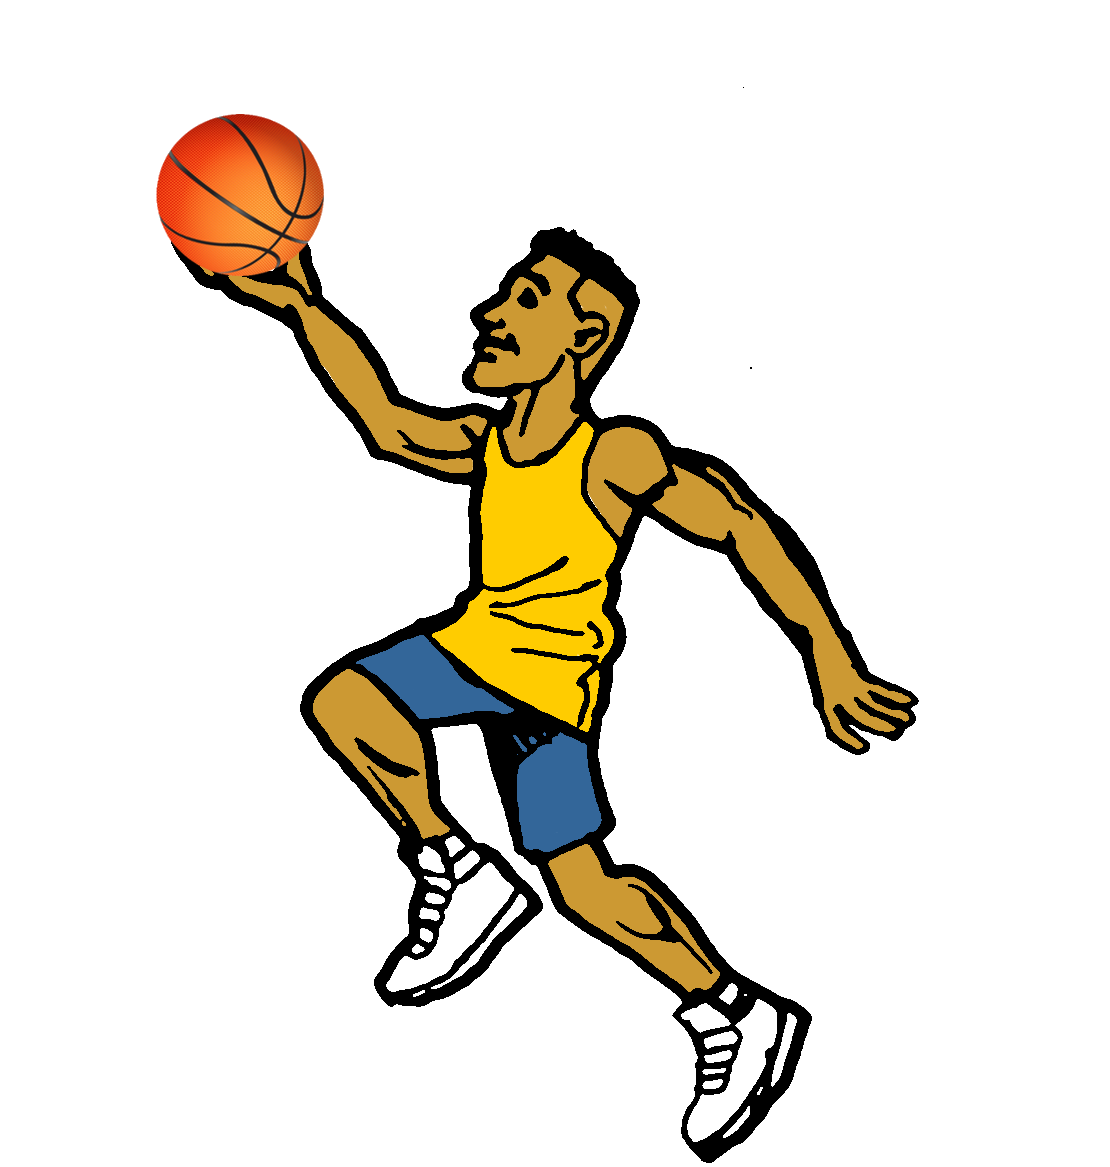 free clipart of a male playing basketball 10321 - aftershockclipart.com